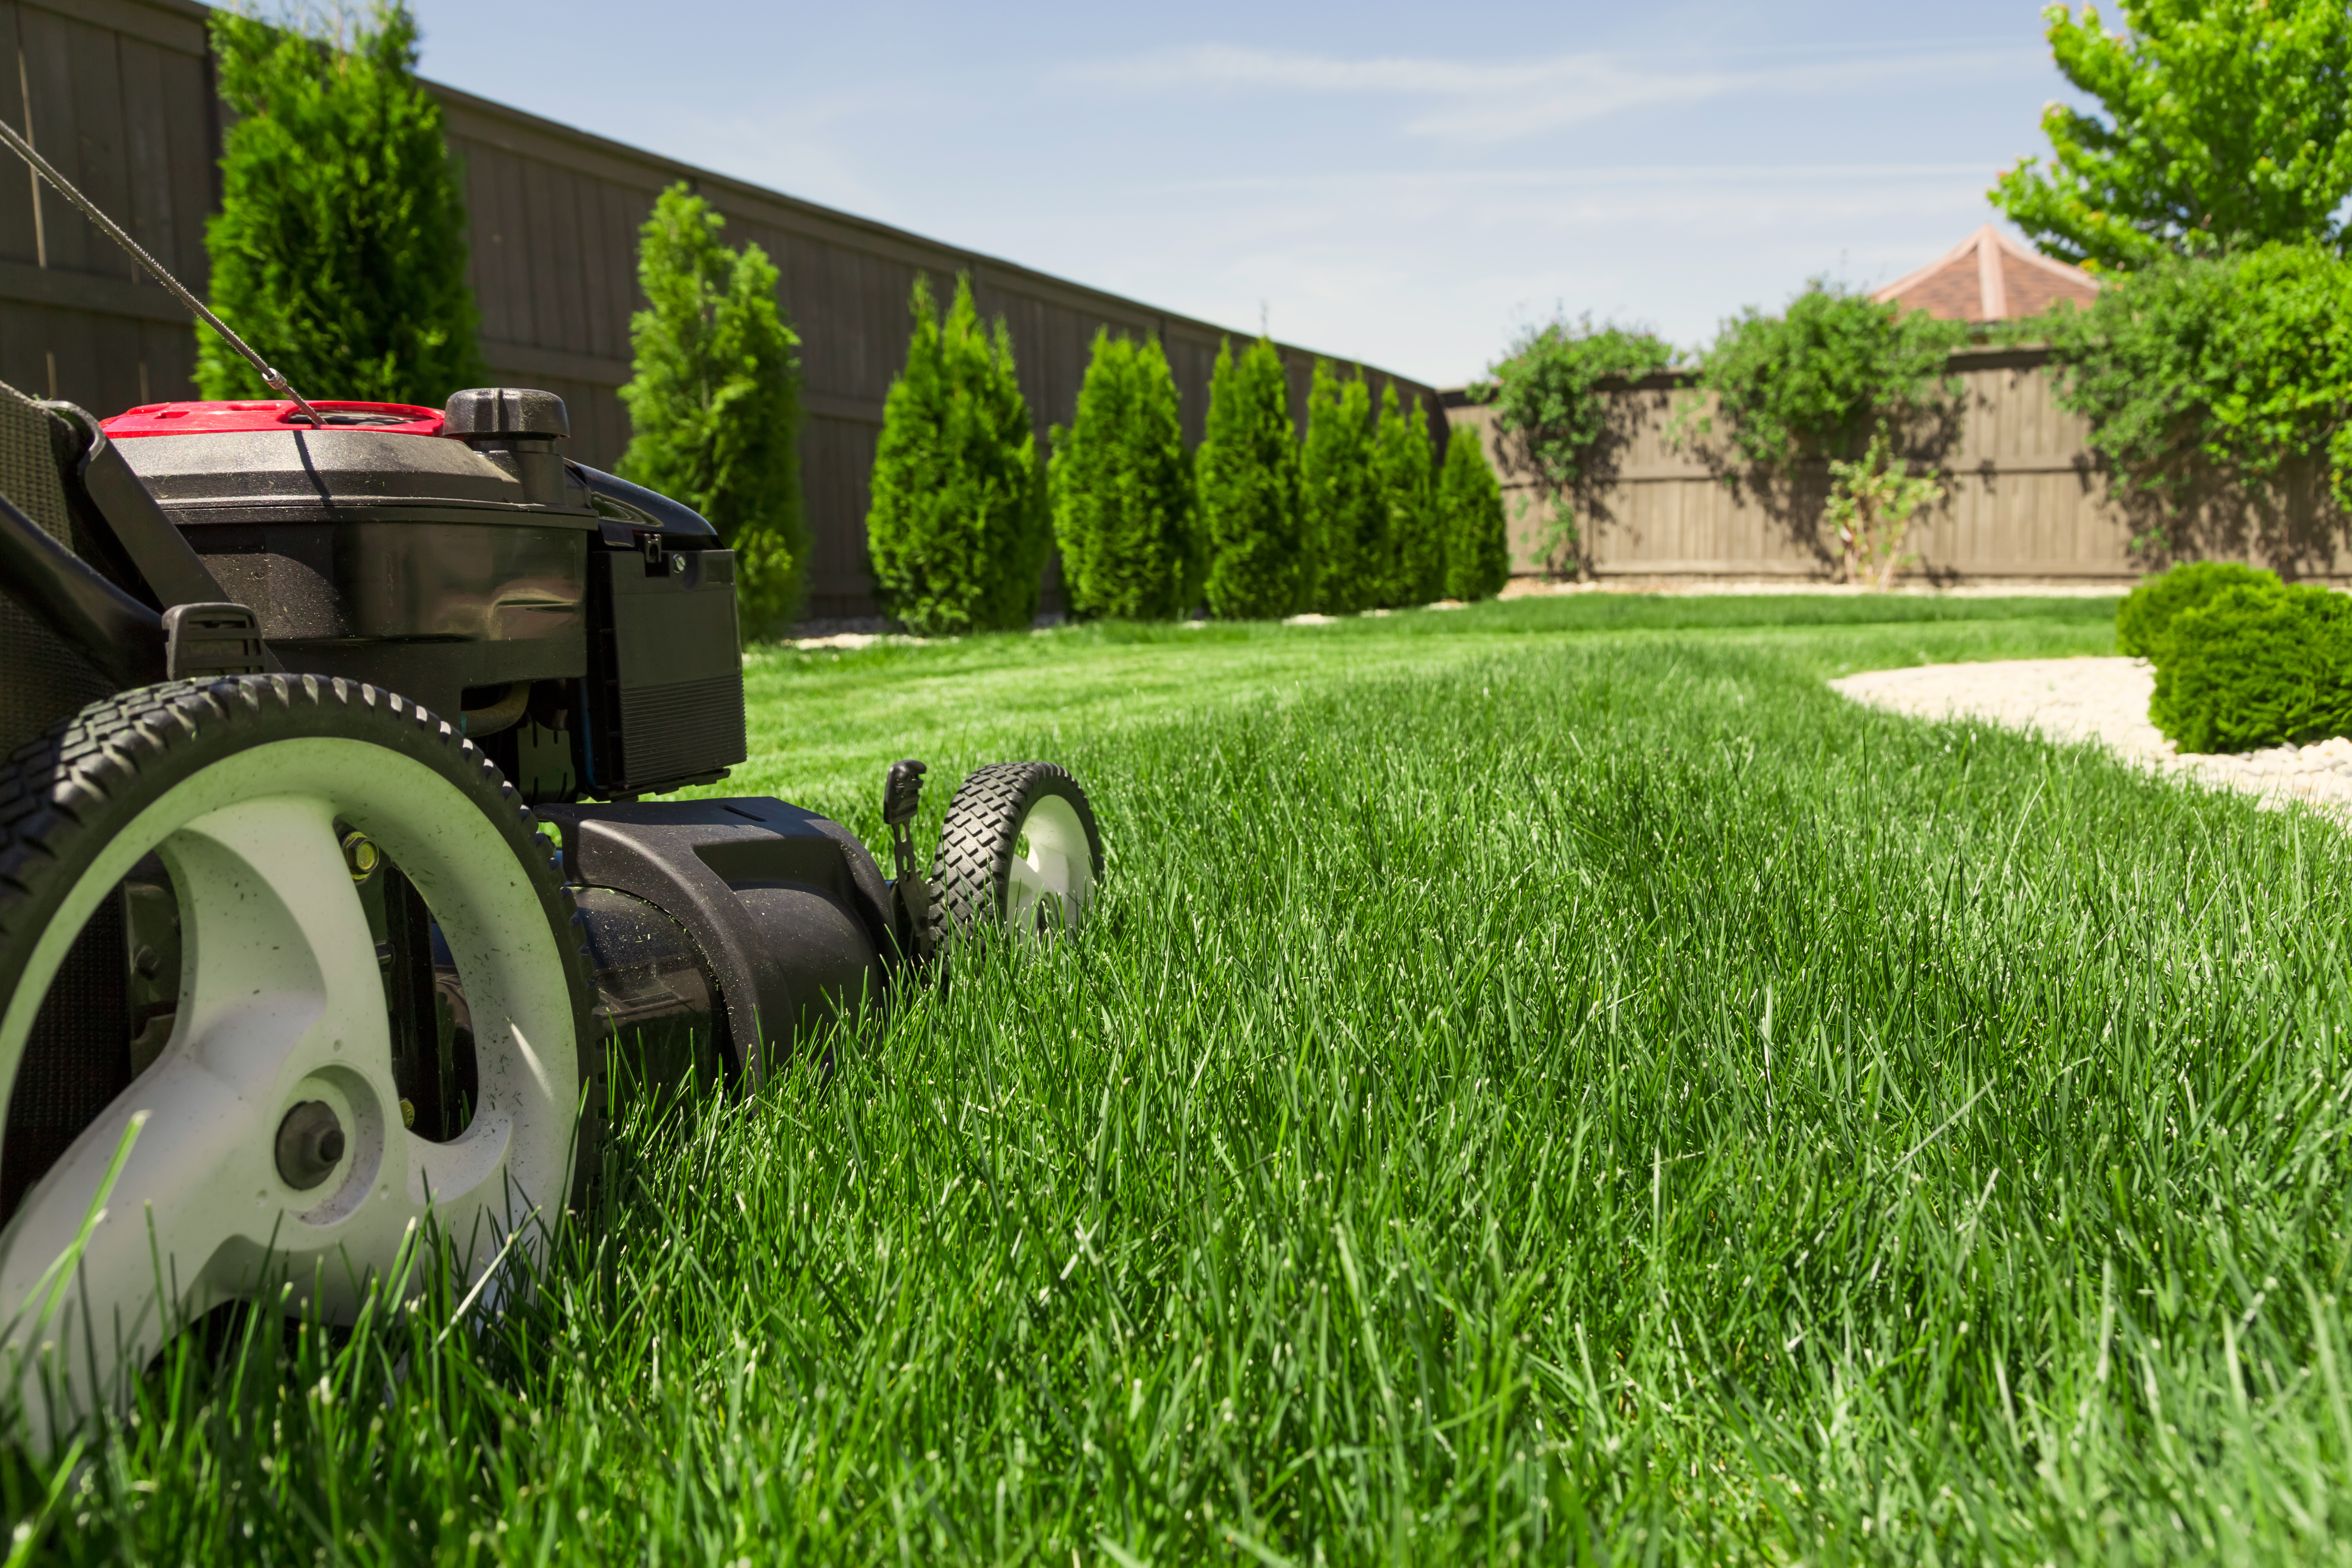 Close-up of a lawn mower in the process of mowing the lawn